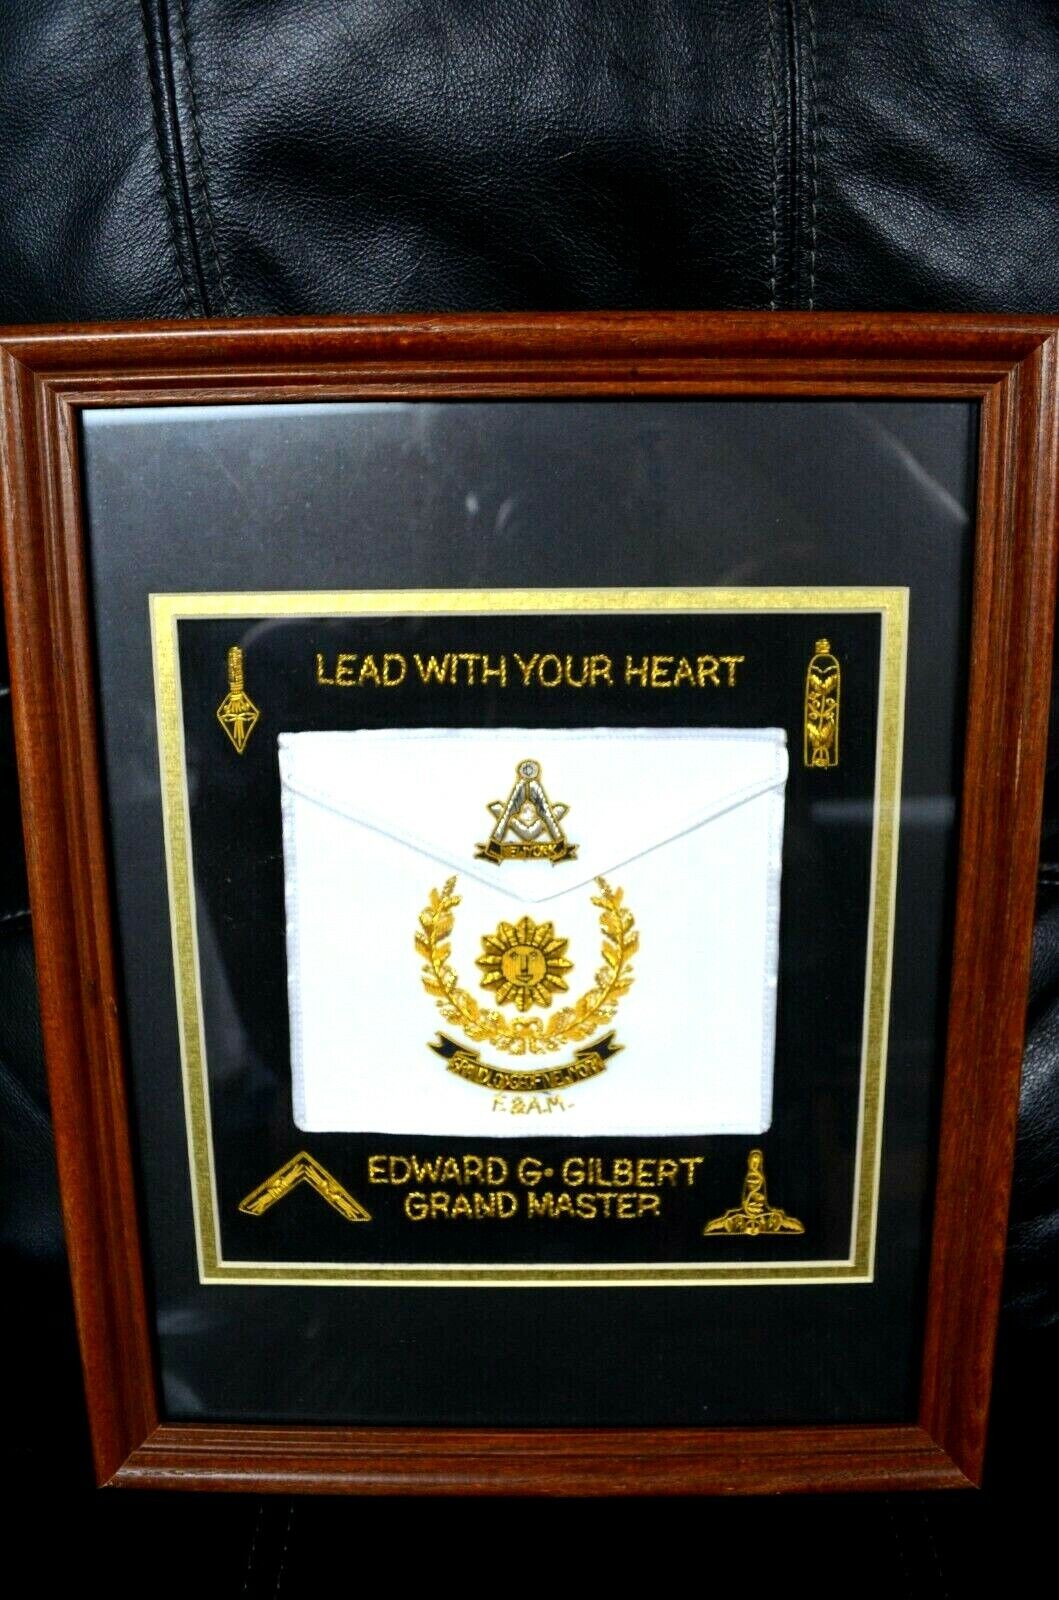 LEAD WITH YOUR HEART FRAMED MASONIC SYMBOL GRAND LODGE OF NEW YORK GRAND MASTER